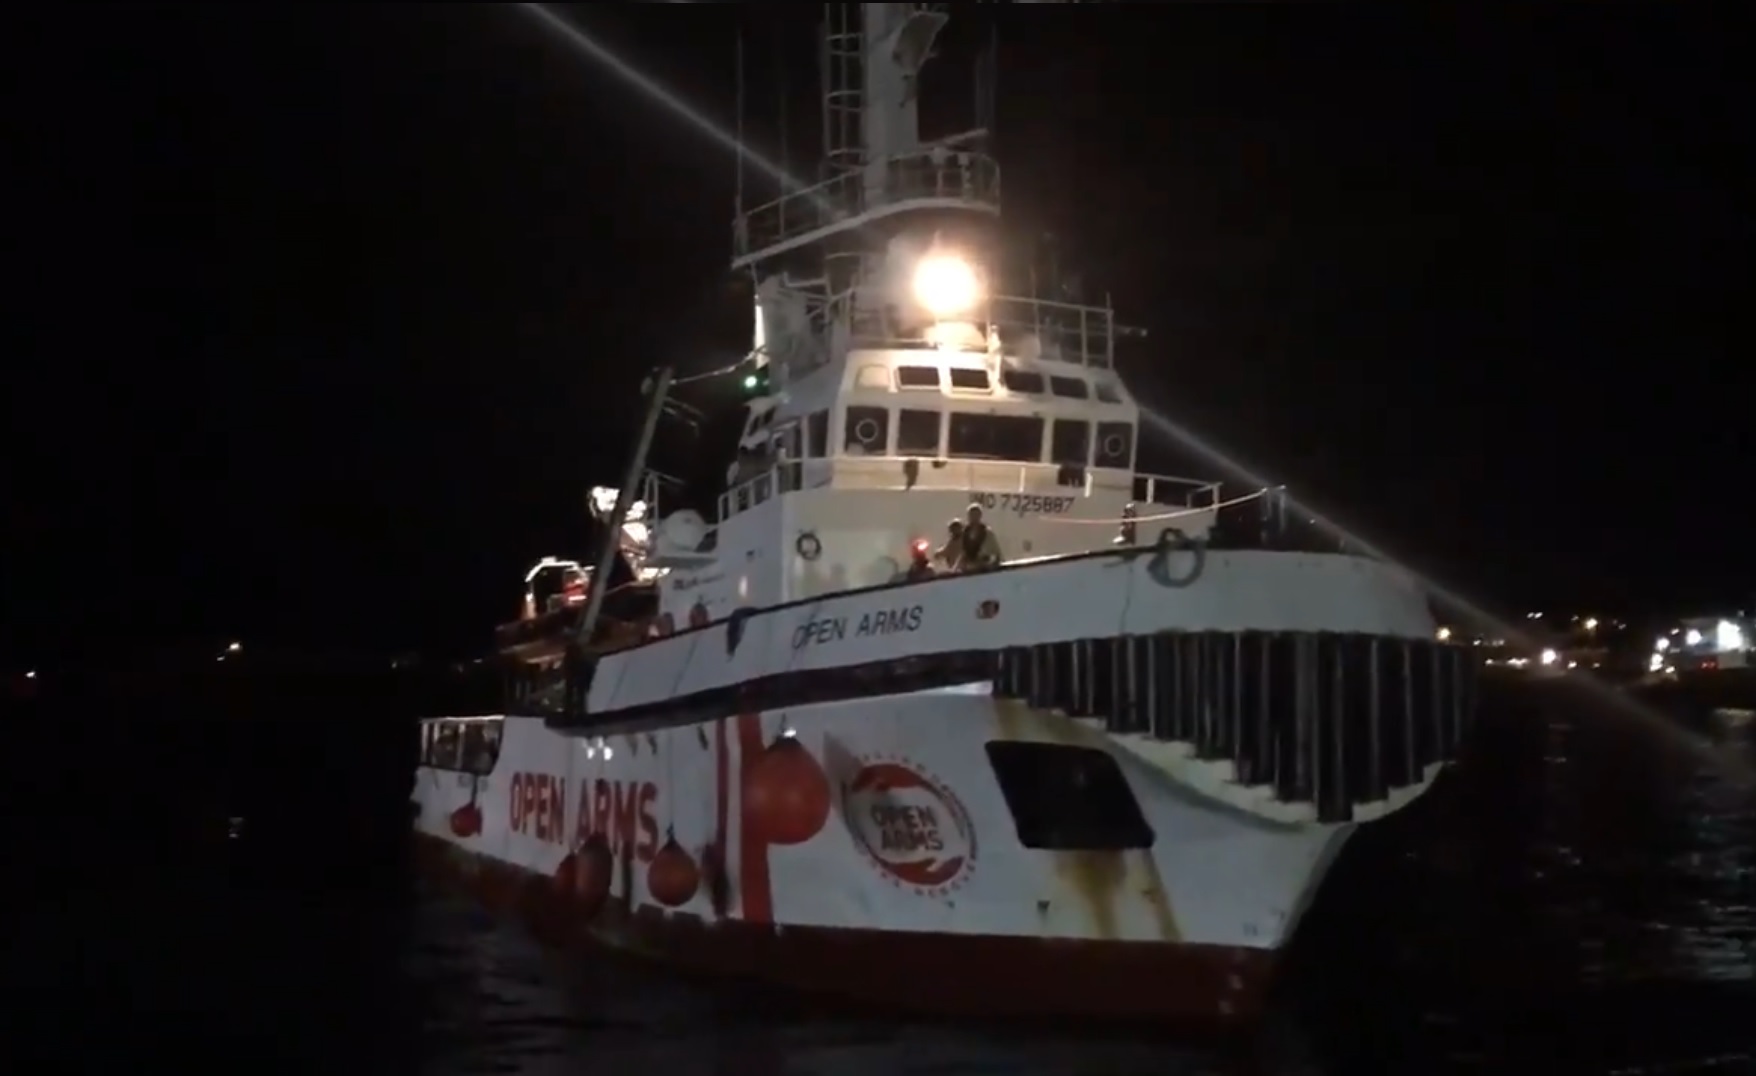 The Open Arms rescue ship arriving in the Lampedusa port (Screenshot from a video by Ane Irazabal)